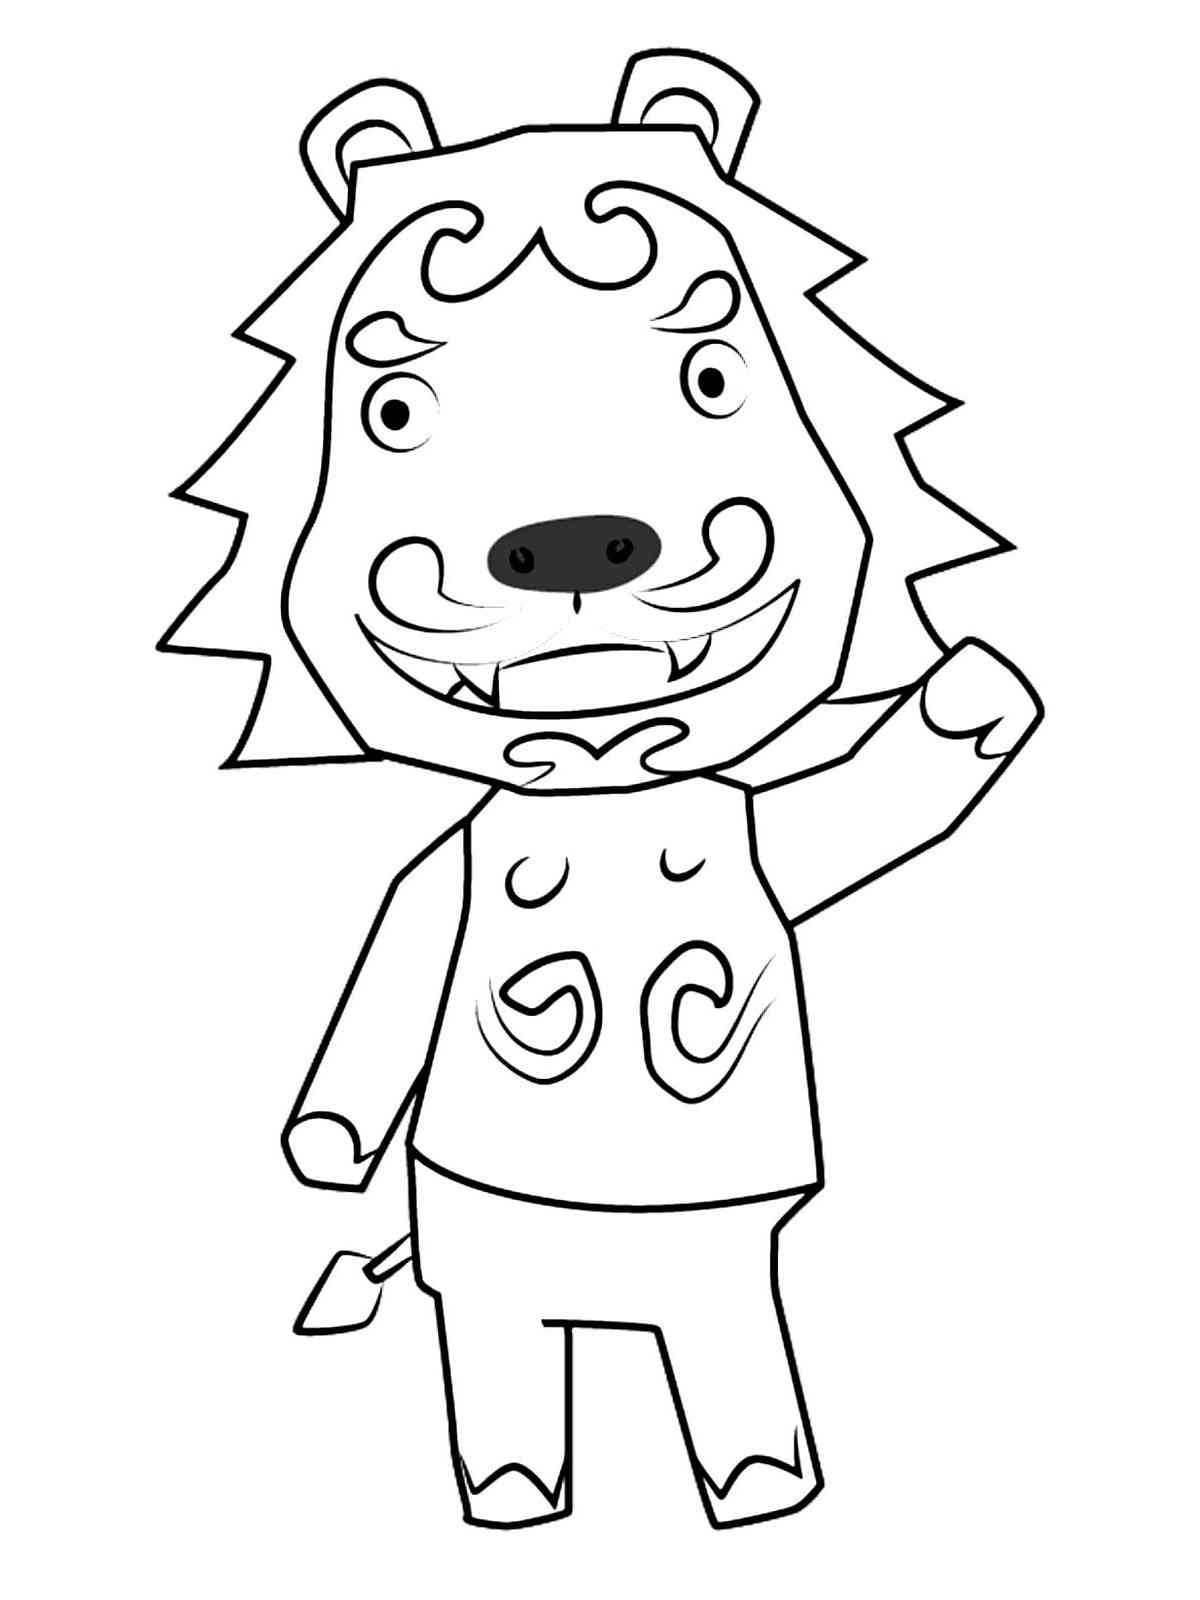 Rory Animal Crossing coloring page